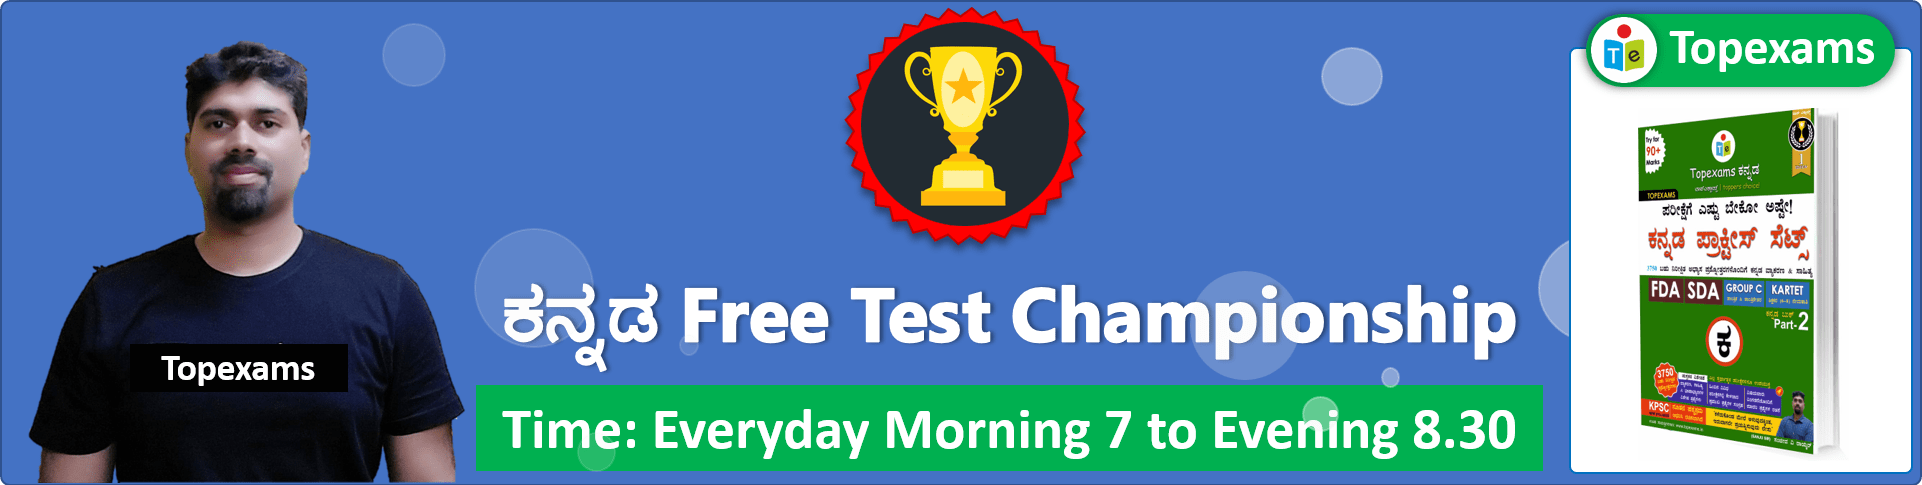 You are currently viewing Test-8 ಕನ್ನಡ Championship  For SDA, FDA, Group C, KARTET